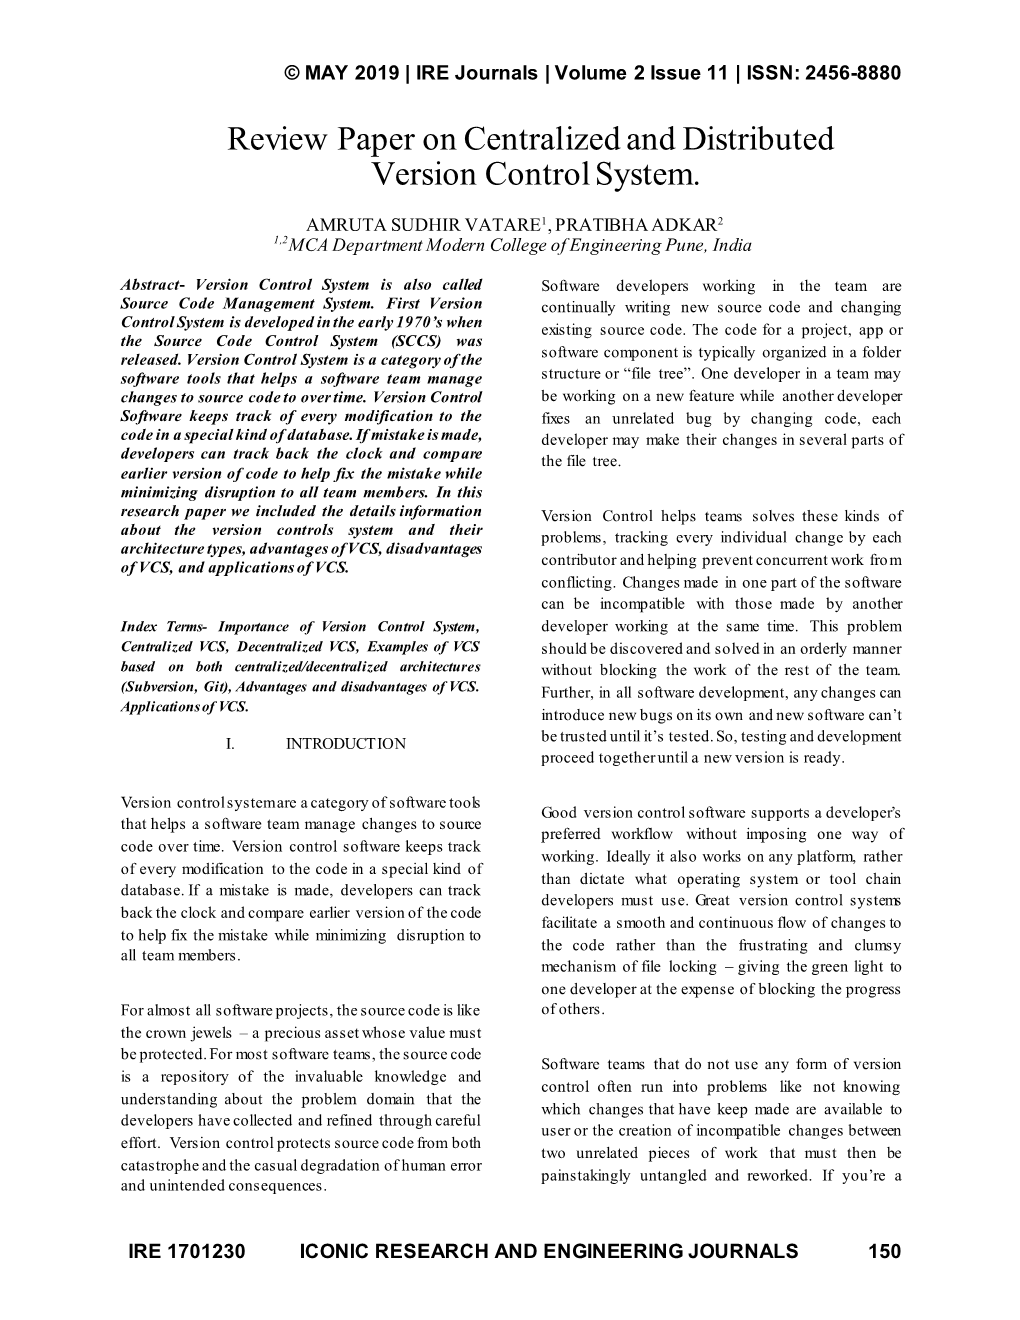 Review Paper on Centralized and Distributed Version Control System